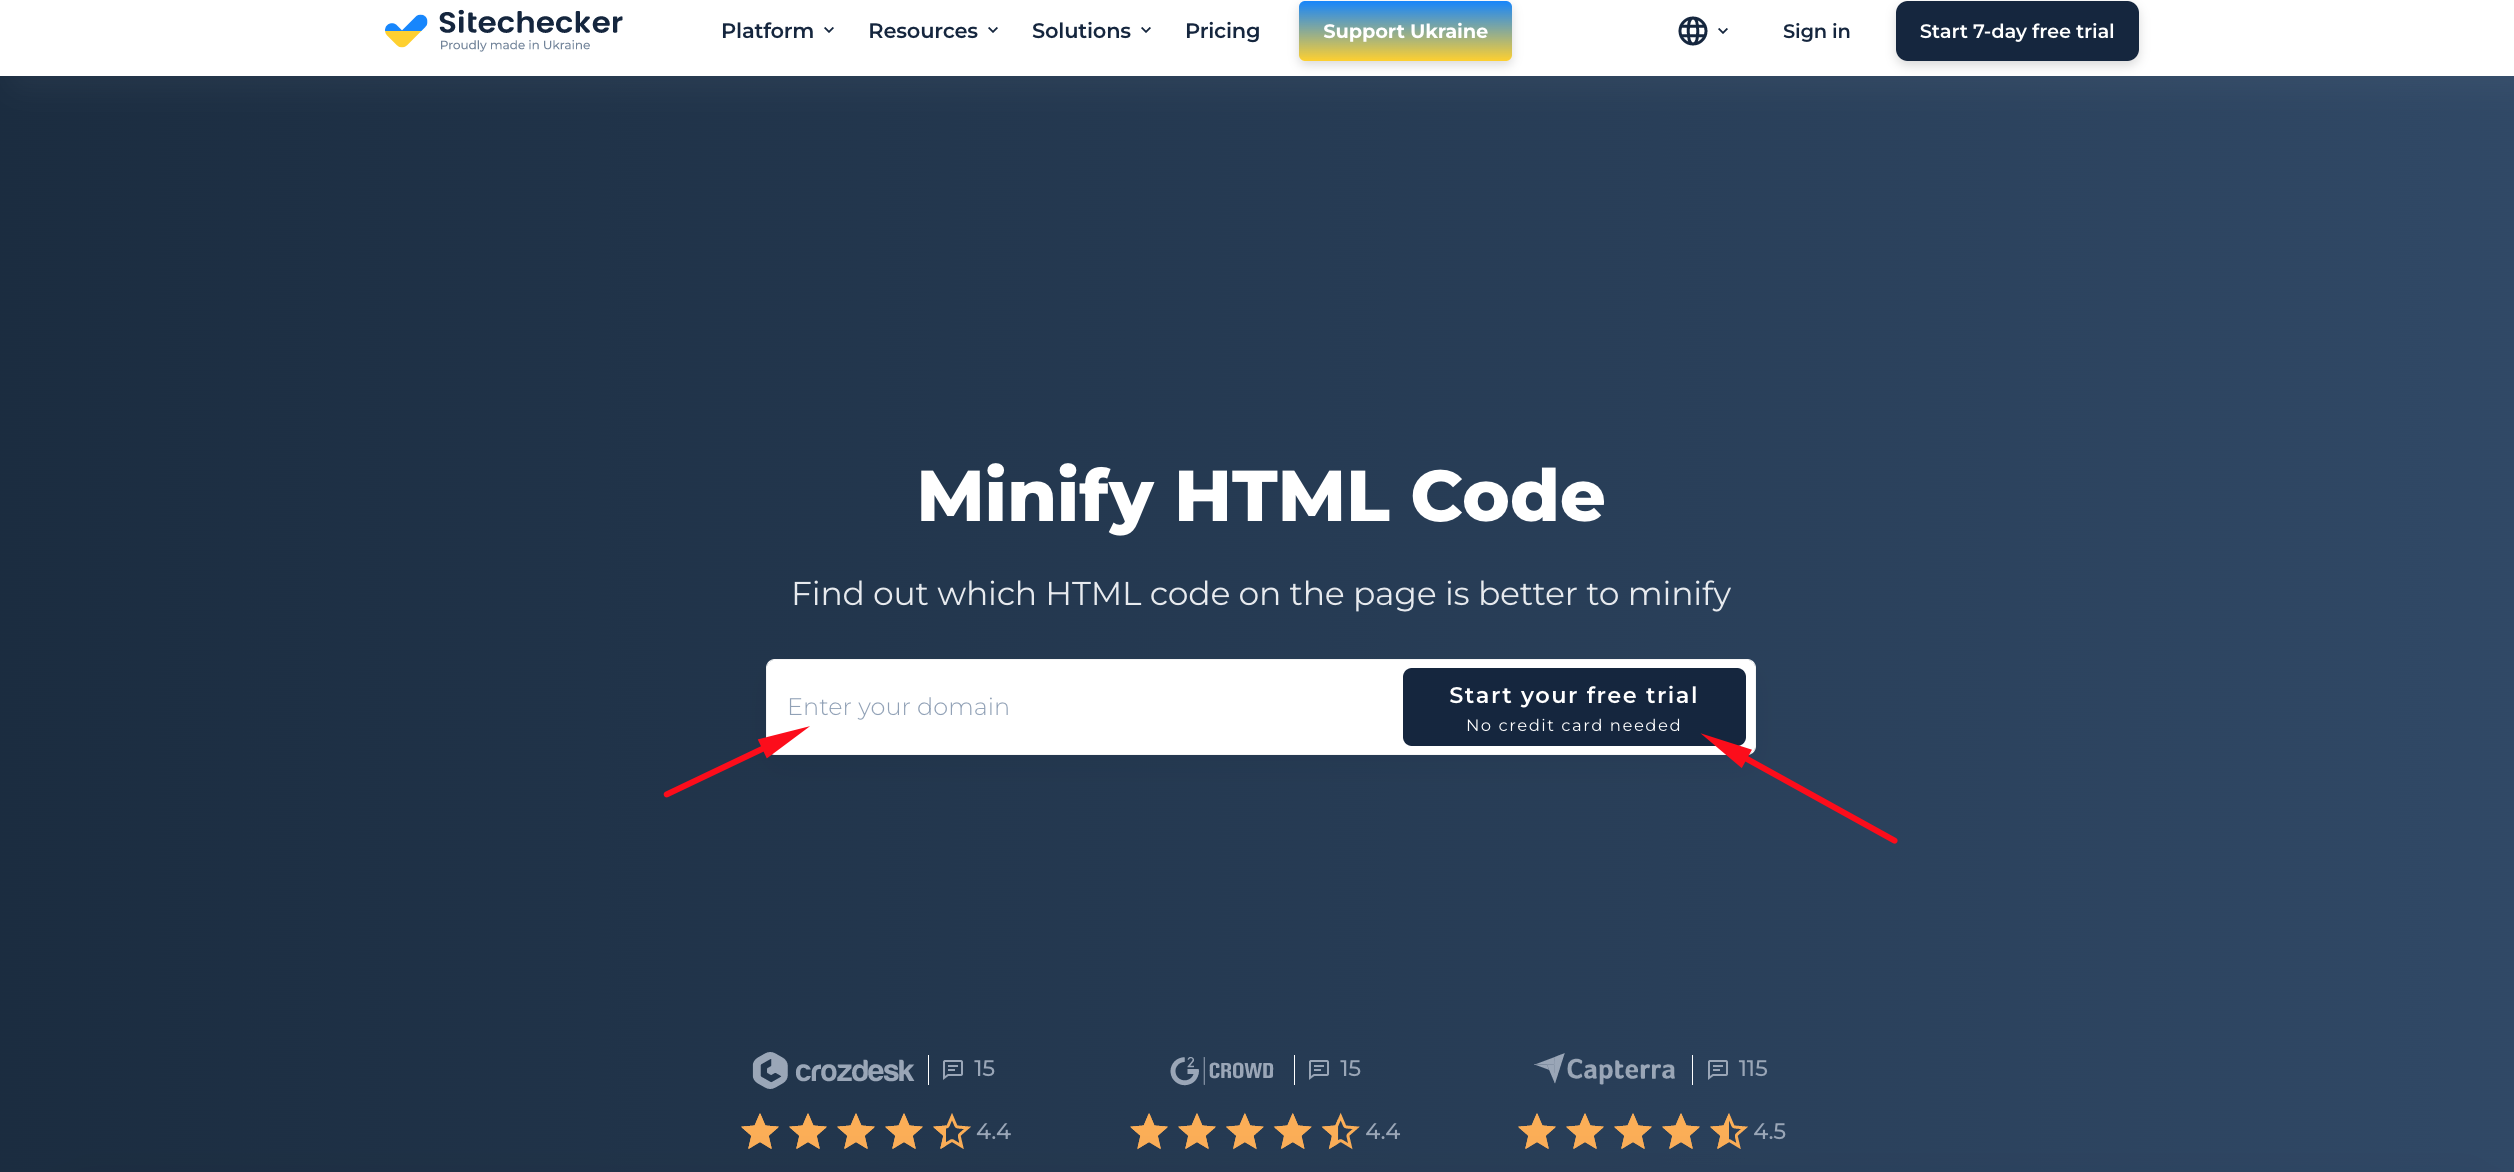 Minify HTML code free trial start